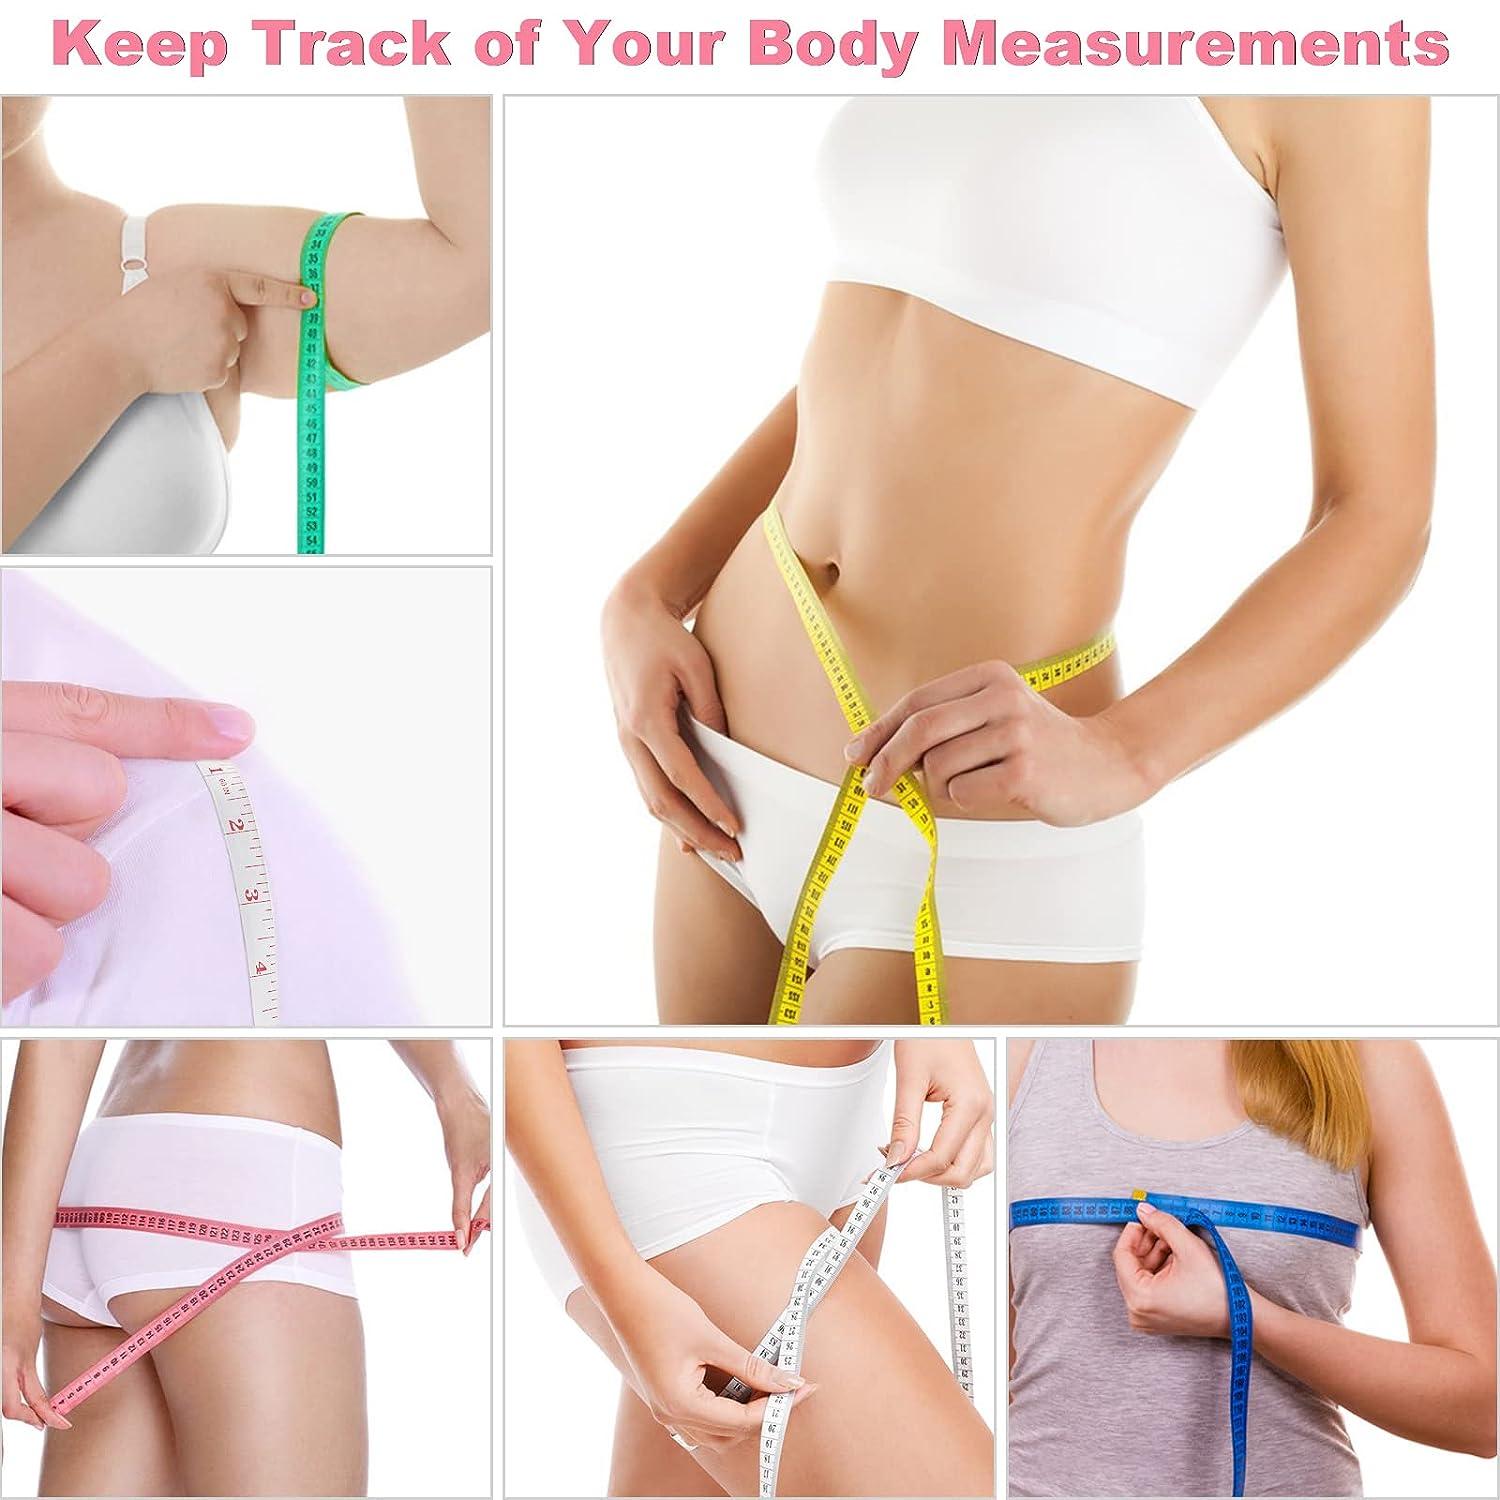 How to Take Body Measurements - The Tailoress